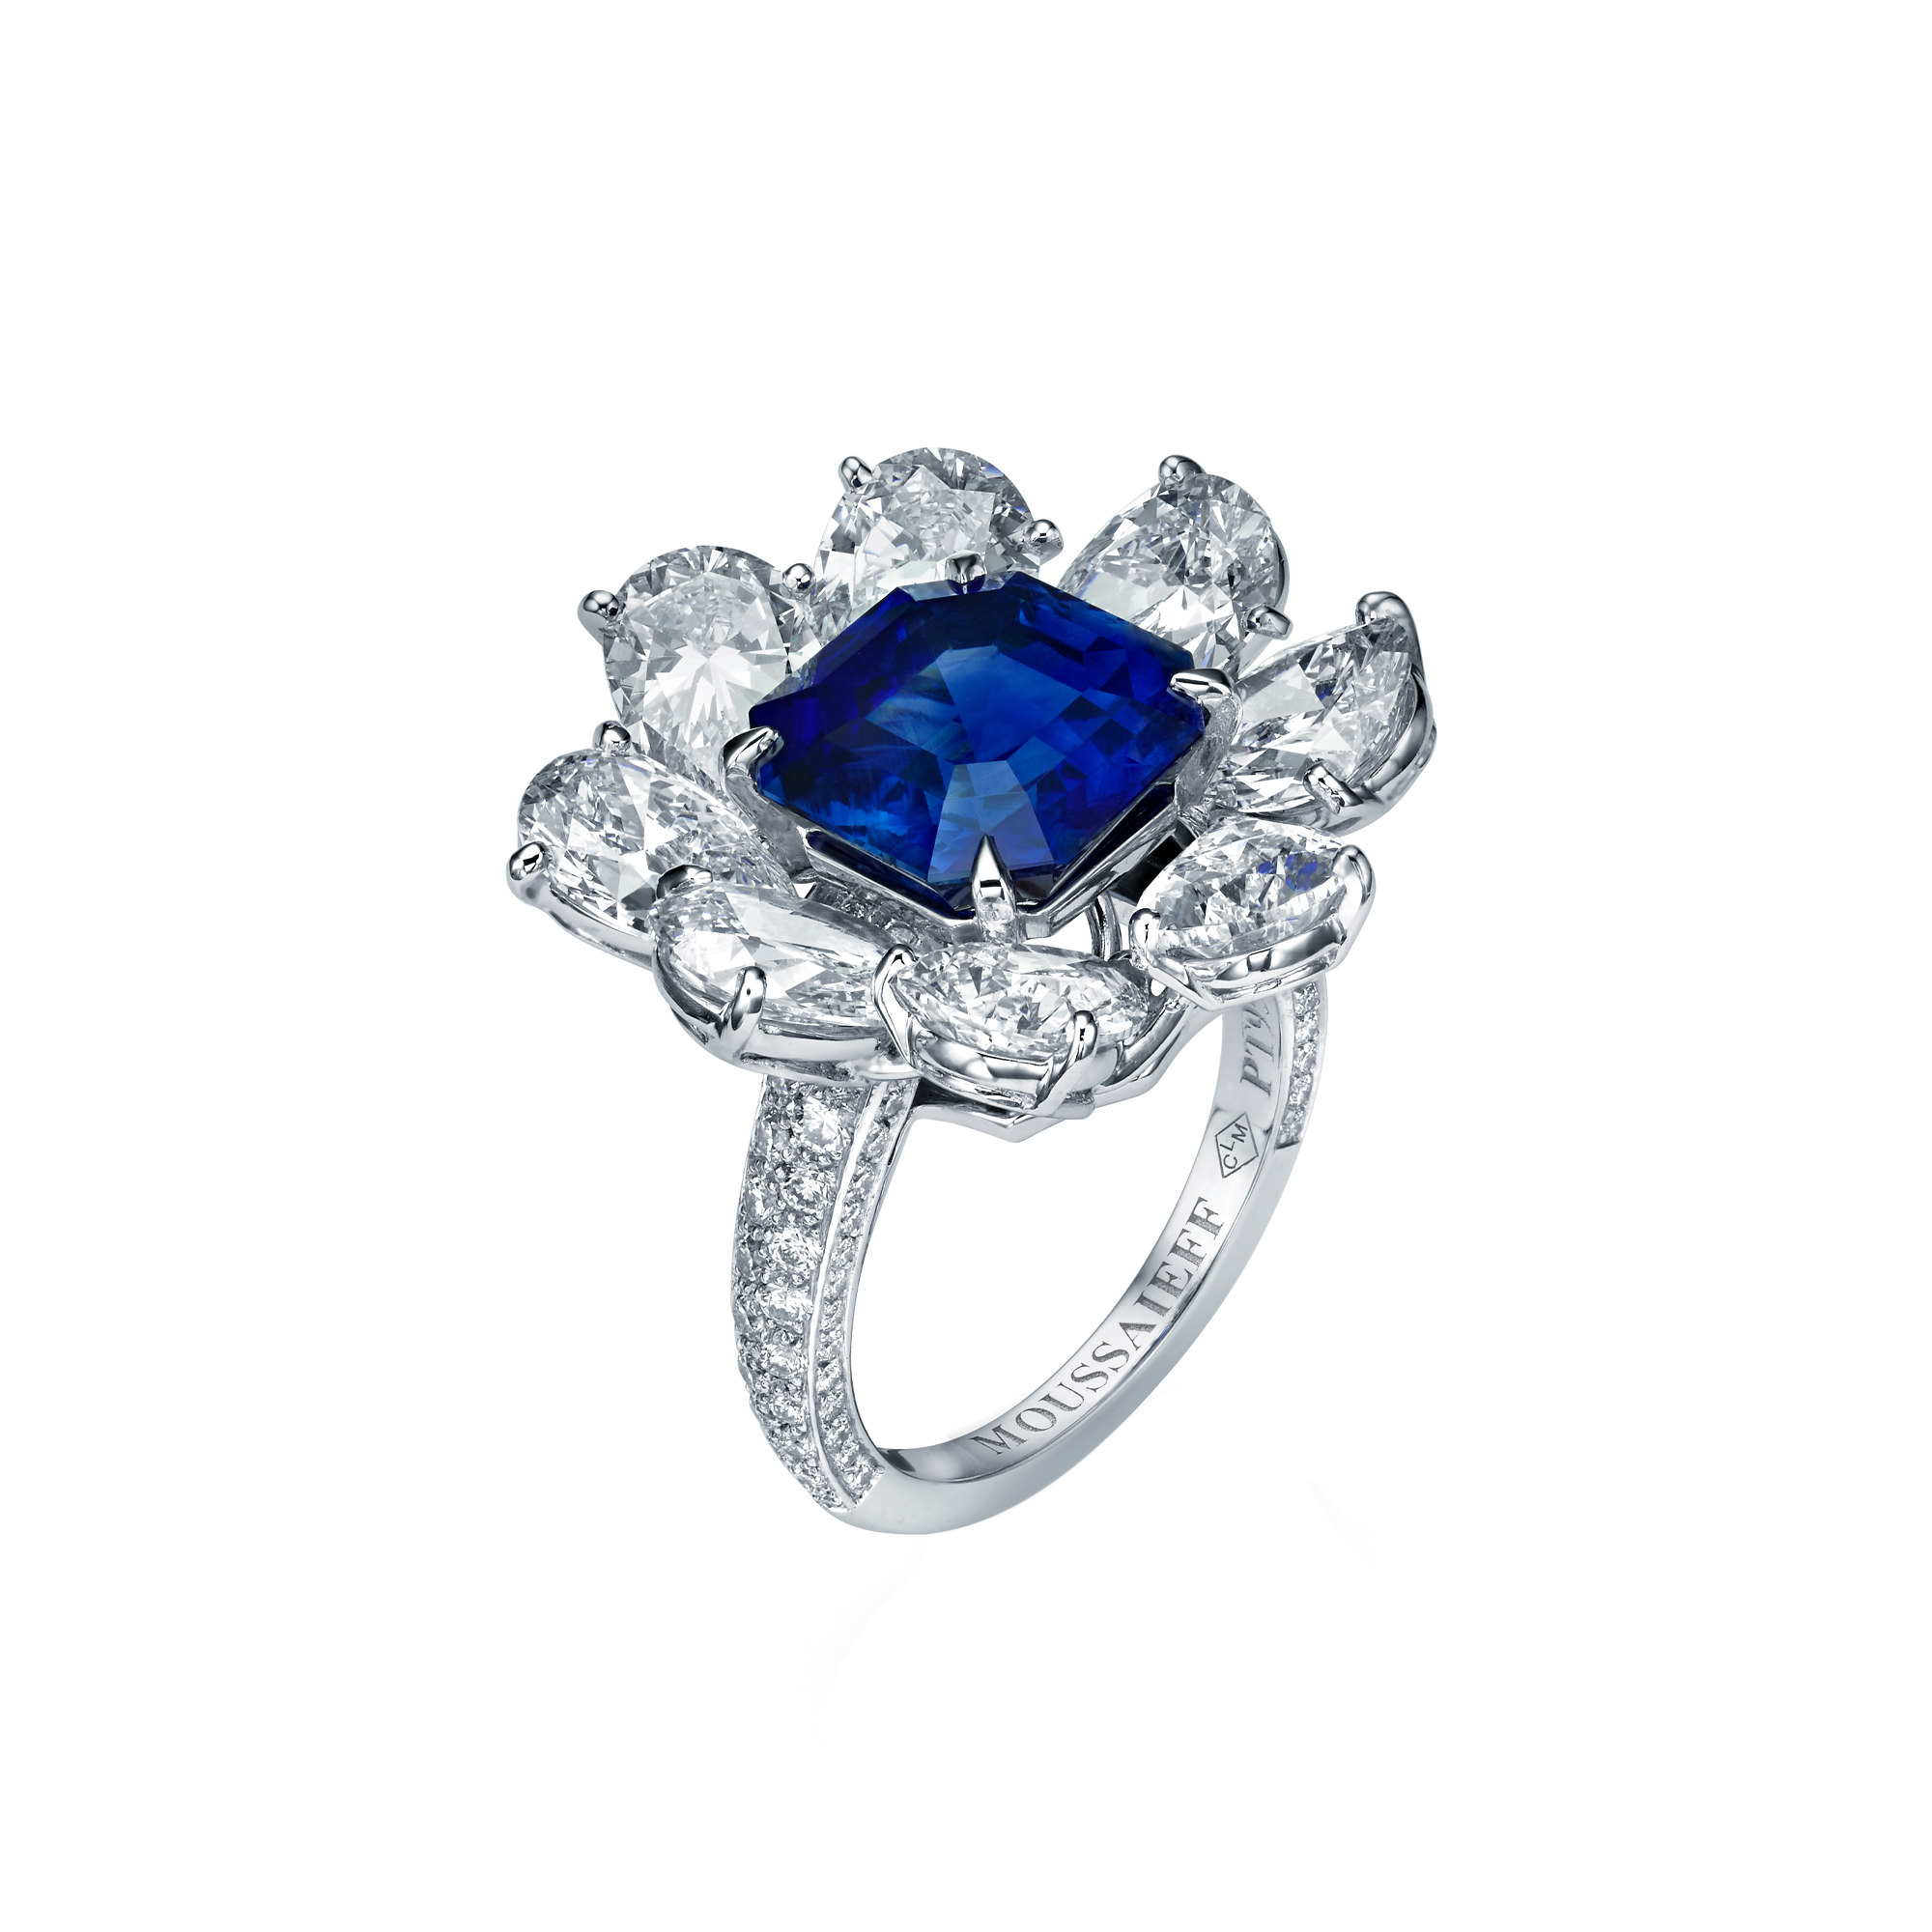 This classic ring by the Italian jewelry house Bulgari is set with an  exceptional Kashmir sapphire. Weighing 11.42 carats, the brilliant ... |  Instagram